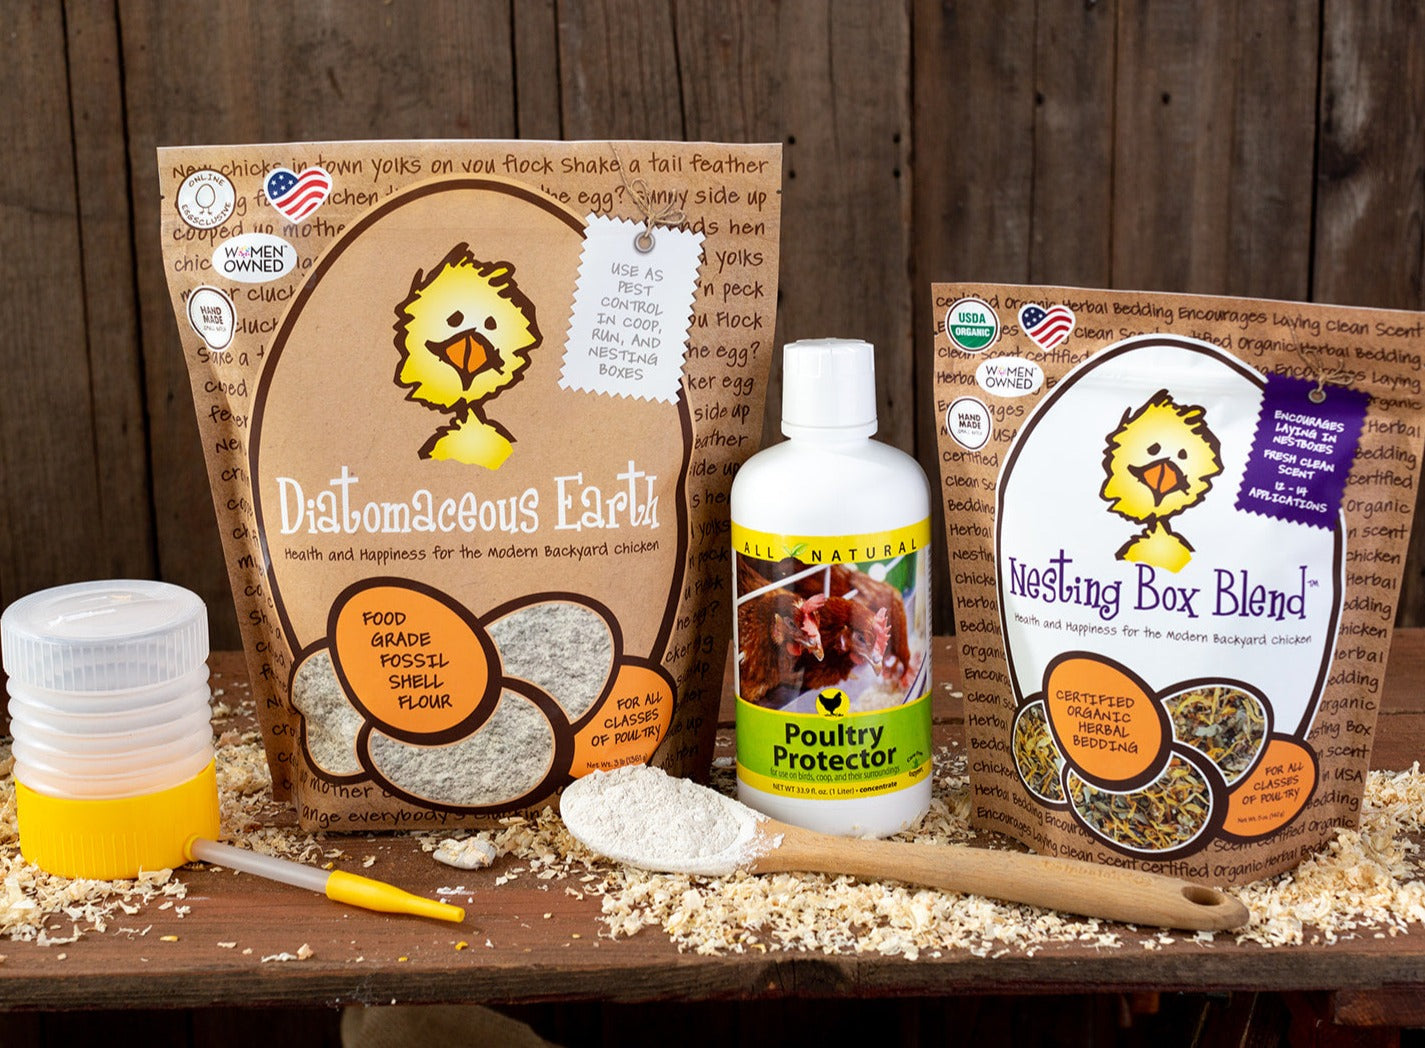 Don't Bug Me Bundle Don’t Bug Me Bundle Treats for Chickens. Nesting Box Blend + Food Grade Diatomaceous Earth. With Certified Organic Treats + Non-GMO Treats for Chickens treats, supplements, herbal nesting box blend, + poultry care + toys. Backyard Chicken Parents flock to Treats for Chickens to treat their pet chickens + poultry. Est 2009 by Dawn in Sonoma County, California, USA. TFC. Shop for Chicken Treats for Chickens.